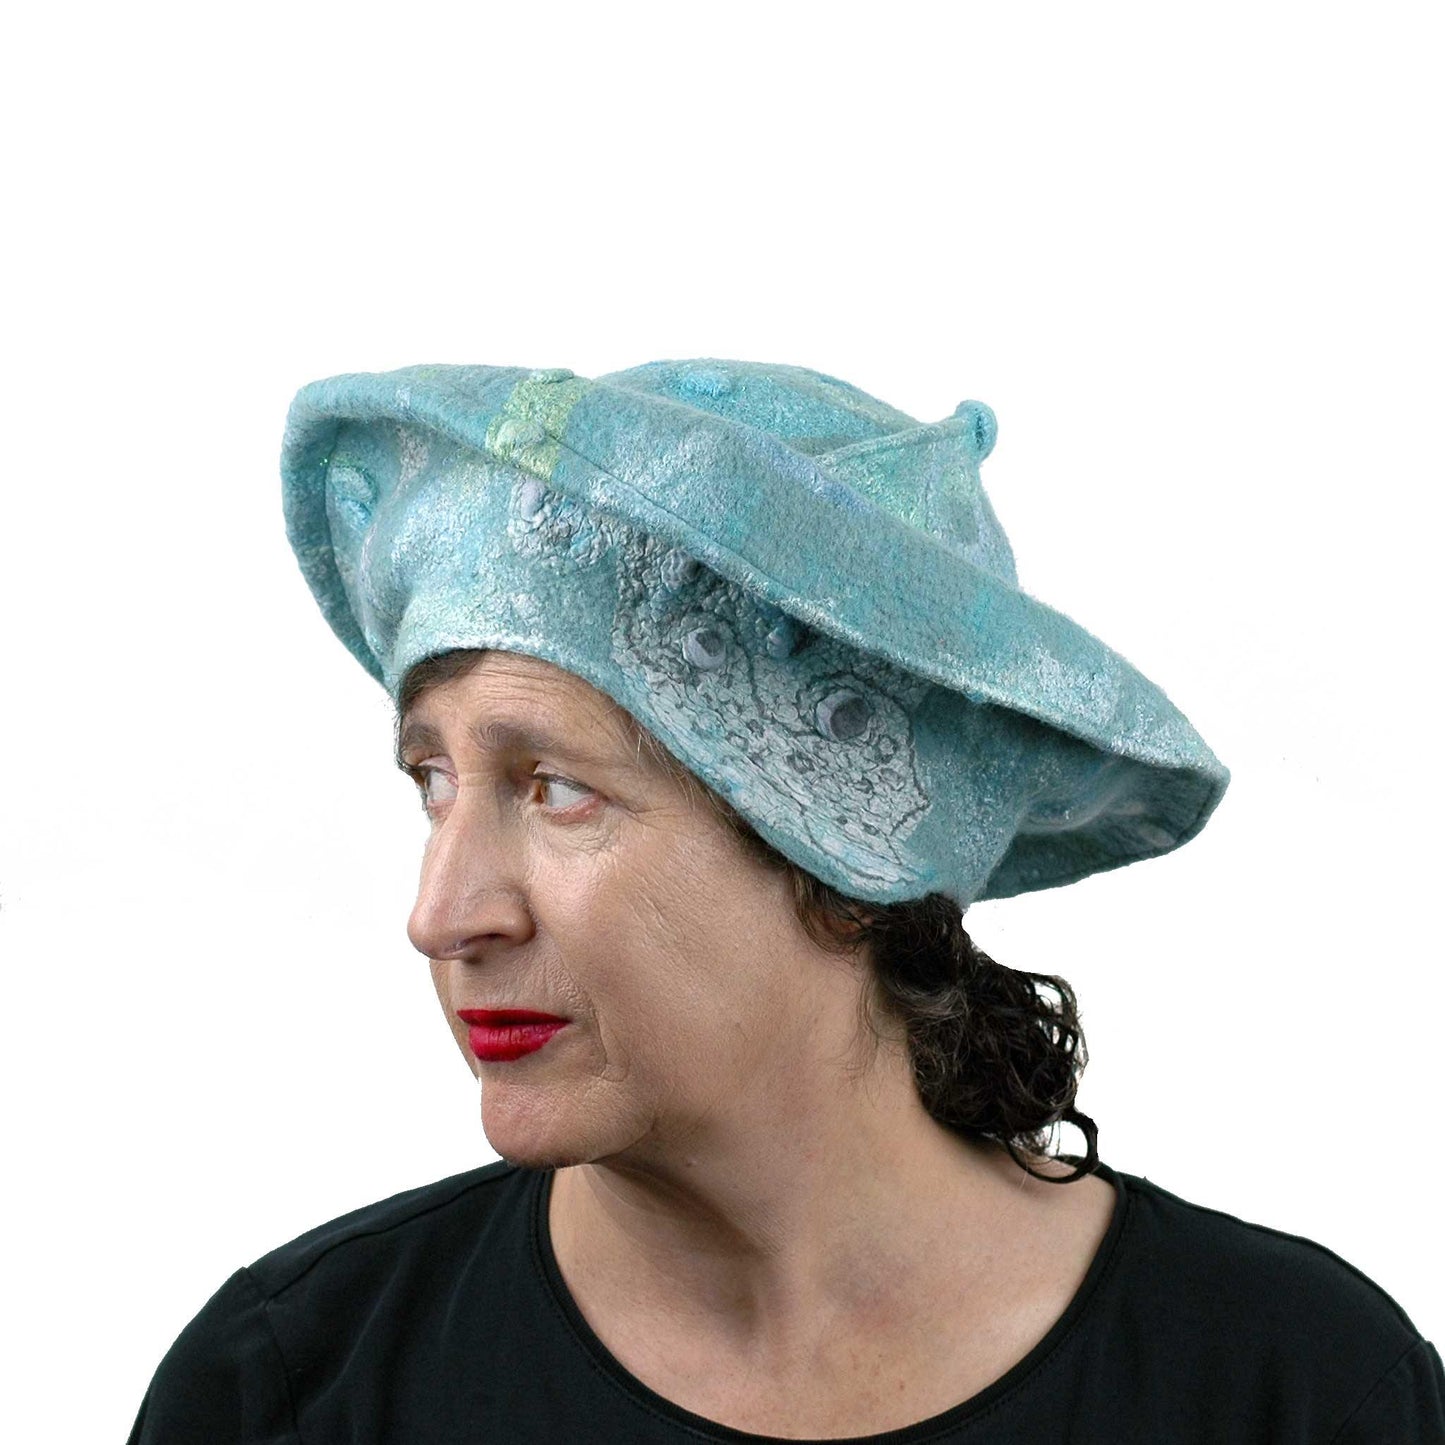 Seafoam Green Medieval Style Felted Hat that Covers Ears - three quarters view